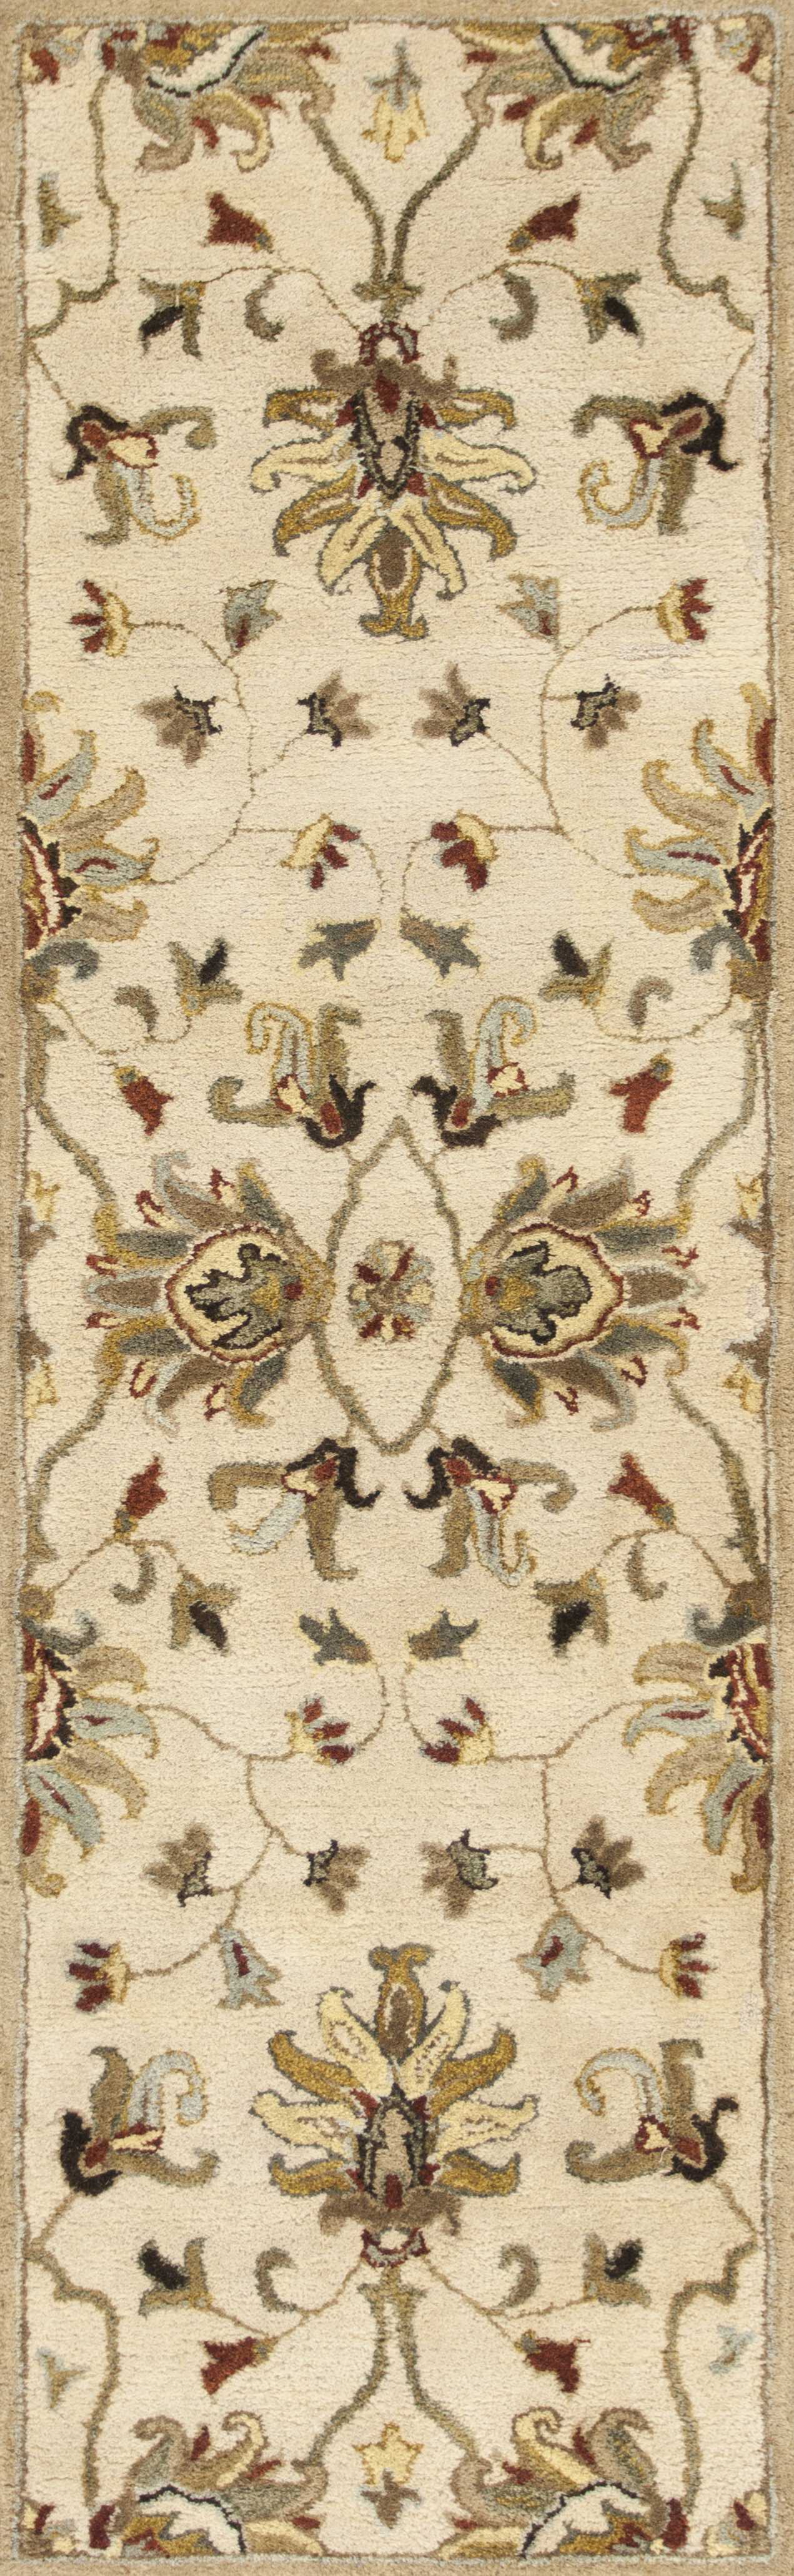 9' X 13' Beige Blue and Ivory Wool Floral Vines Hand Tufted Area Rug